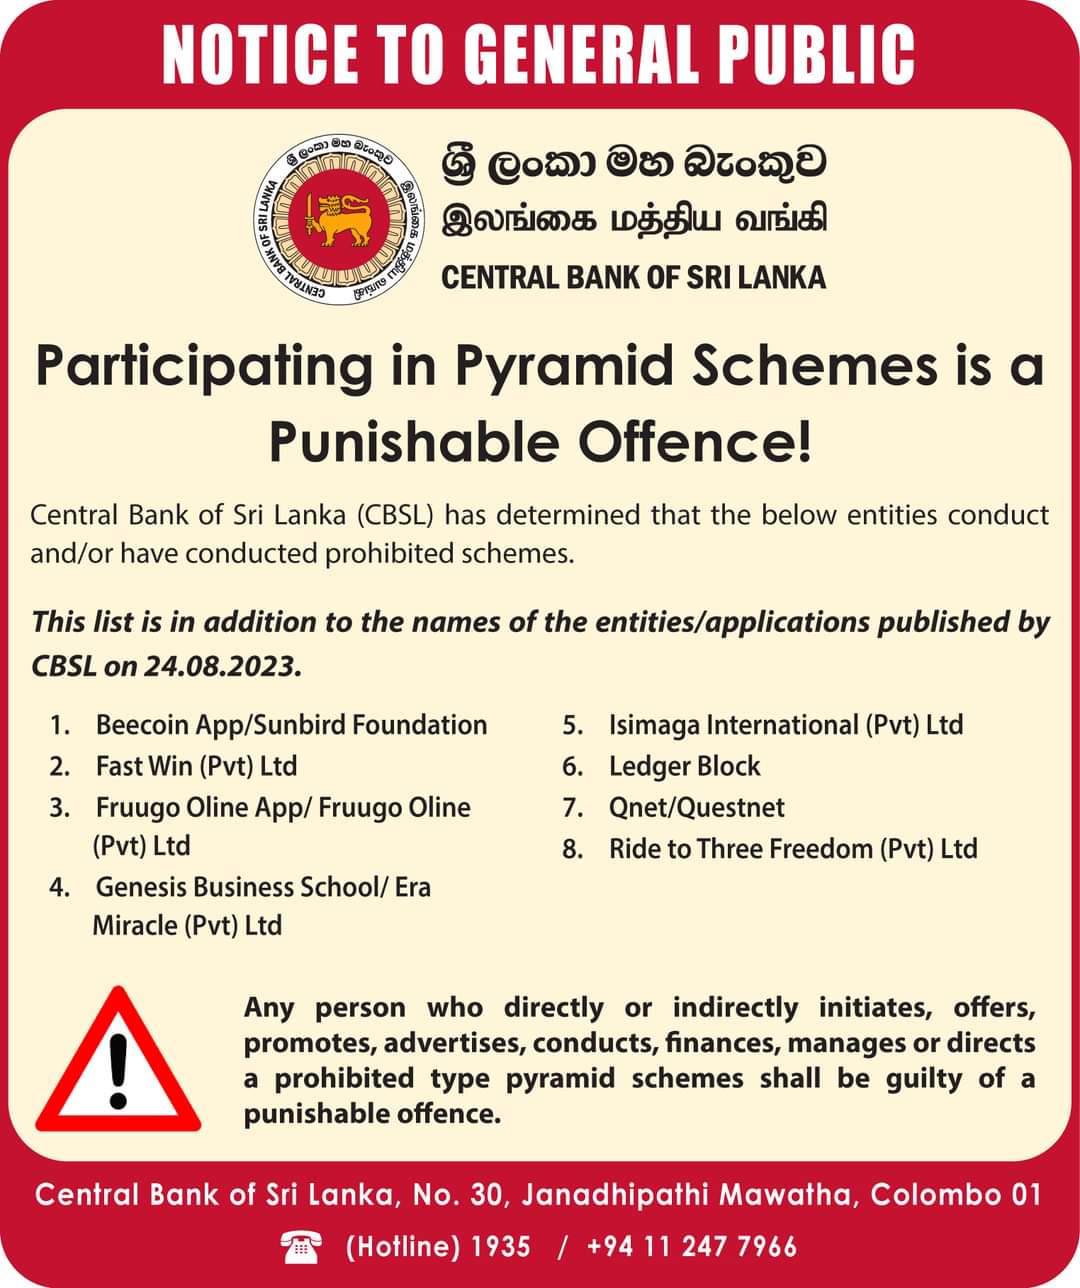 CBSL reveals 8 more companies that conduct prohibited schemes